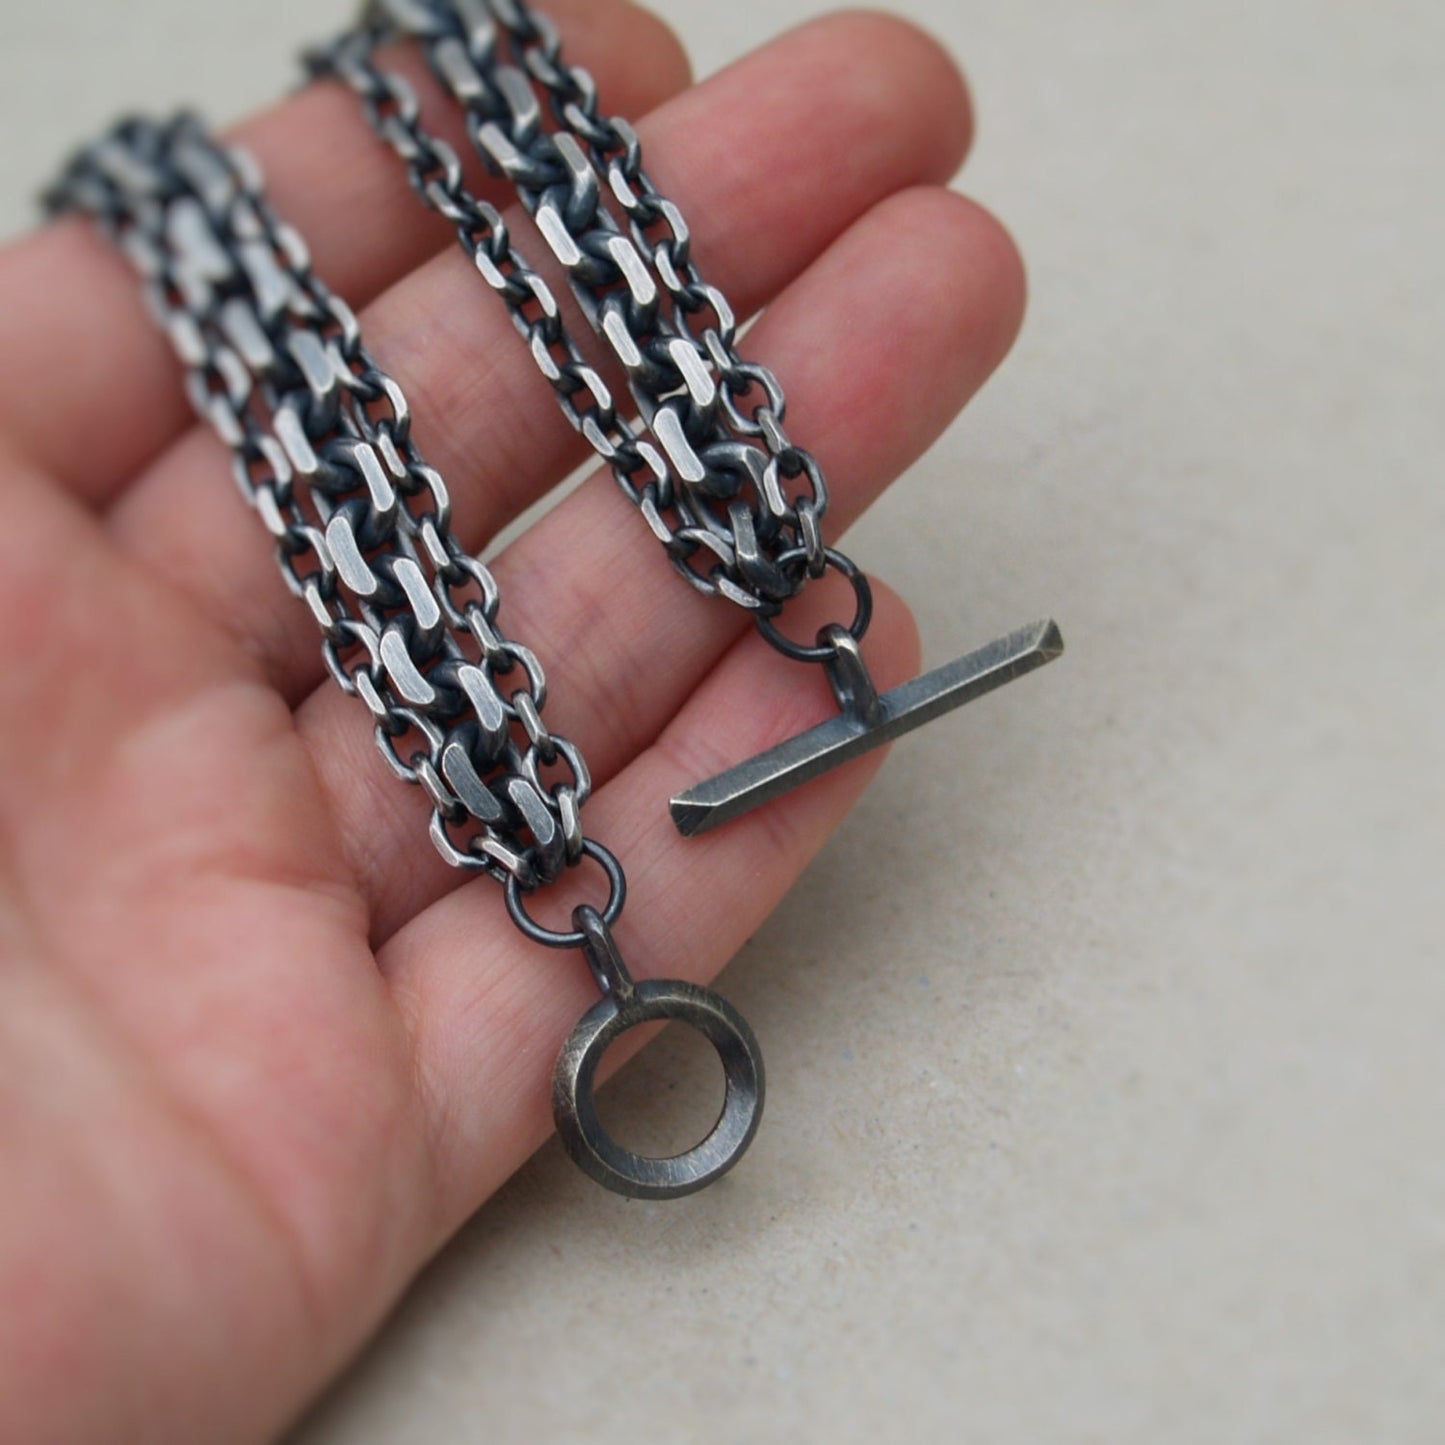 Handmade to order - Oxidised or polished solid silver heavy triple diamond cut trace chain bracelet with a handmade unique T-bar design